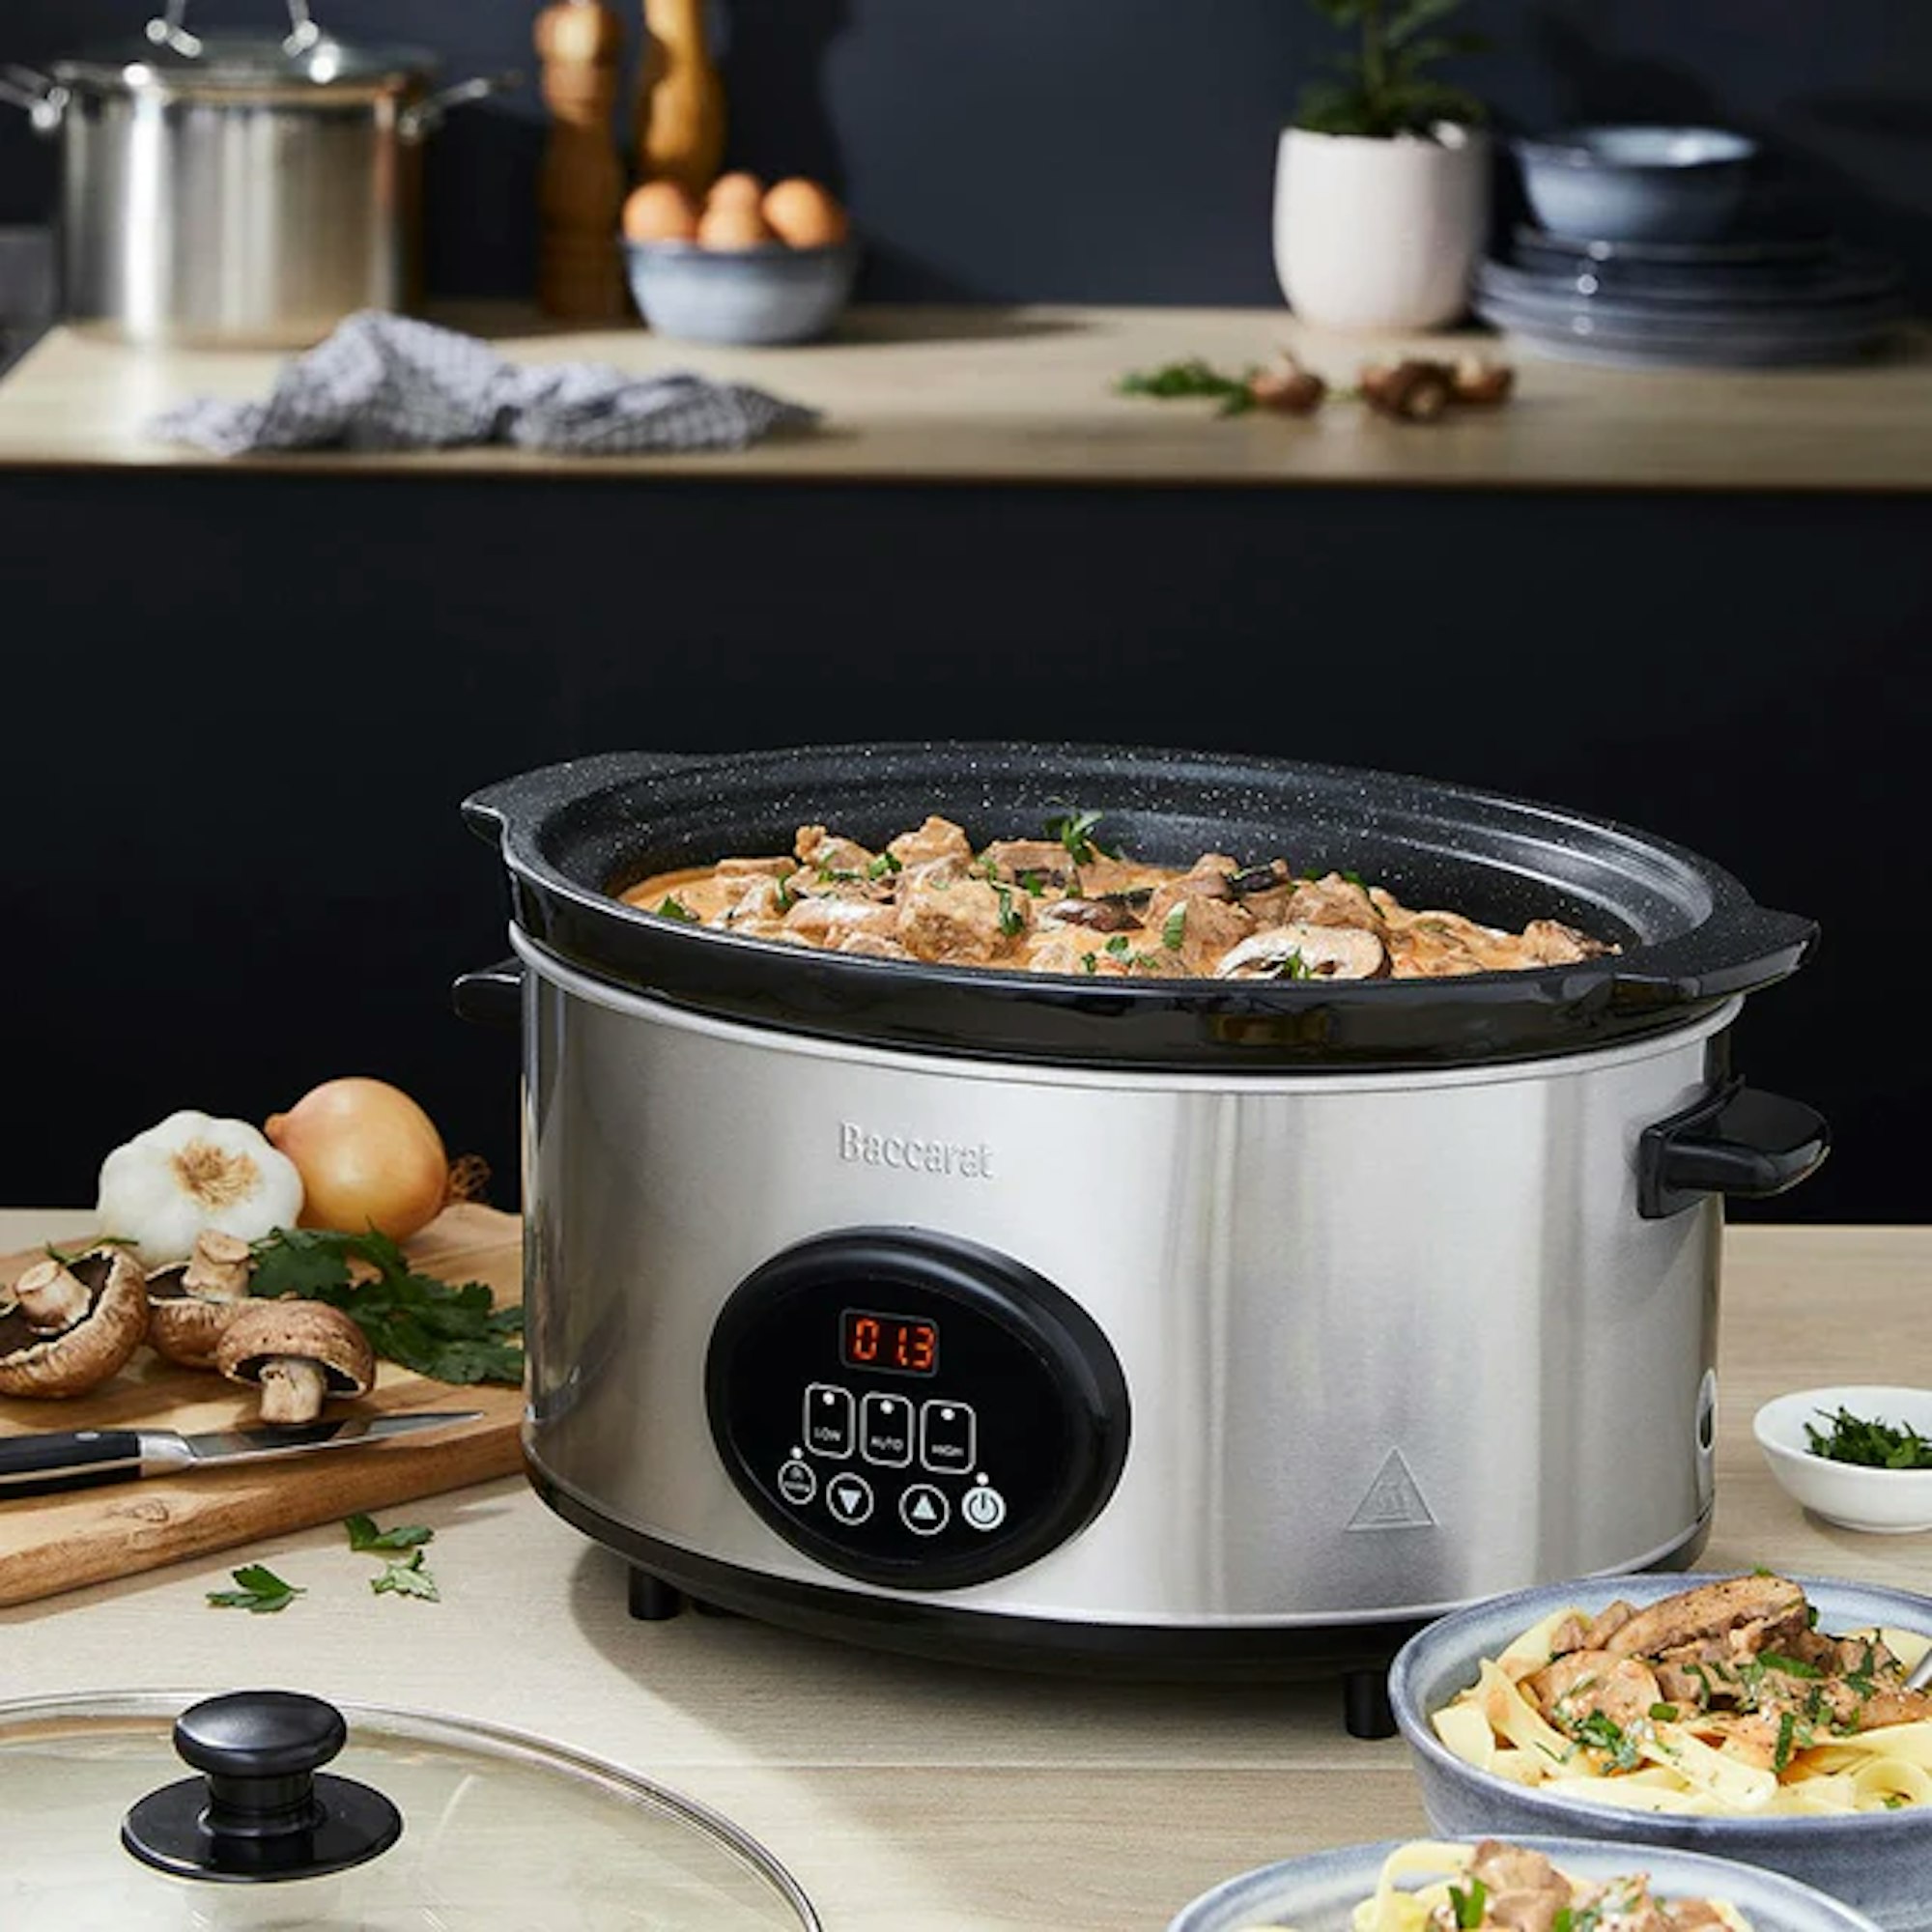 slow cooker appliance on benchtop with cooked stew